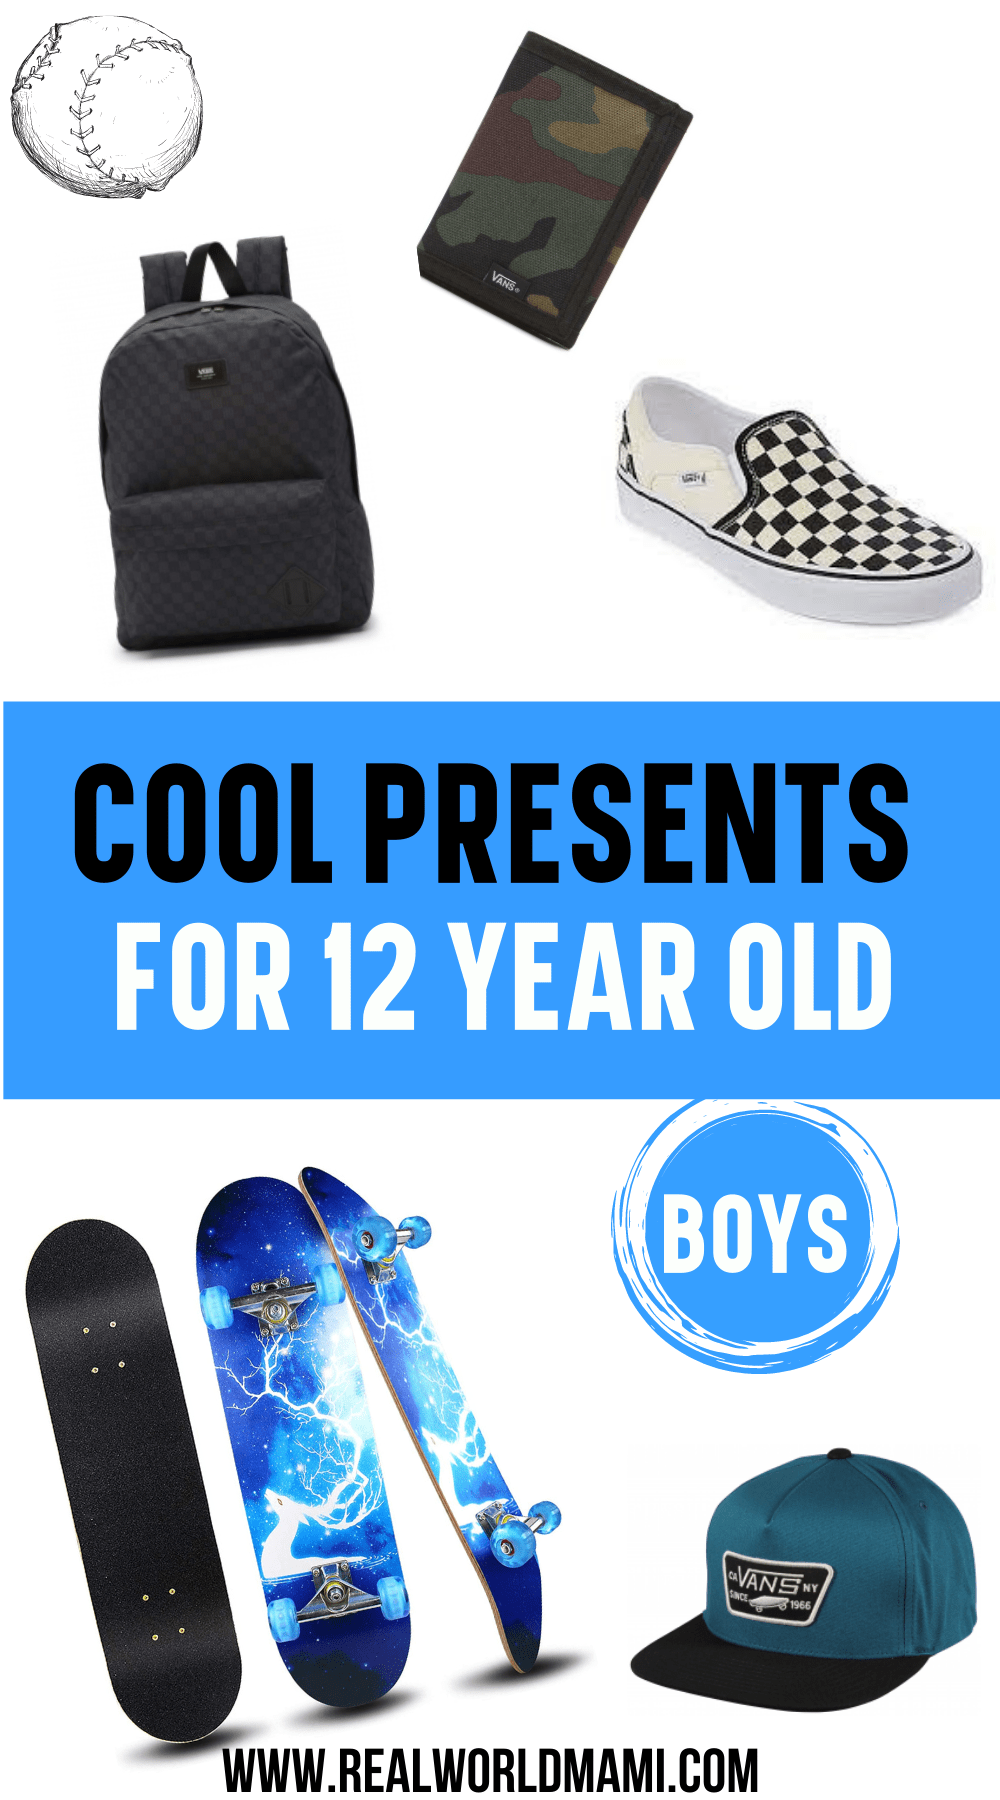 Cool-presents-for-12-year-old-boys-PIN1